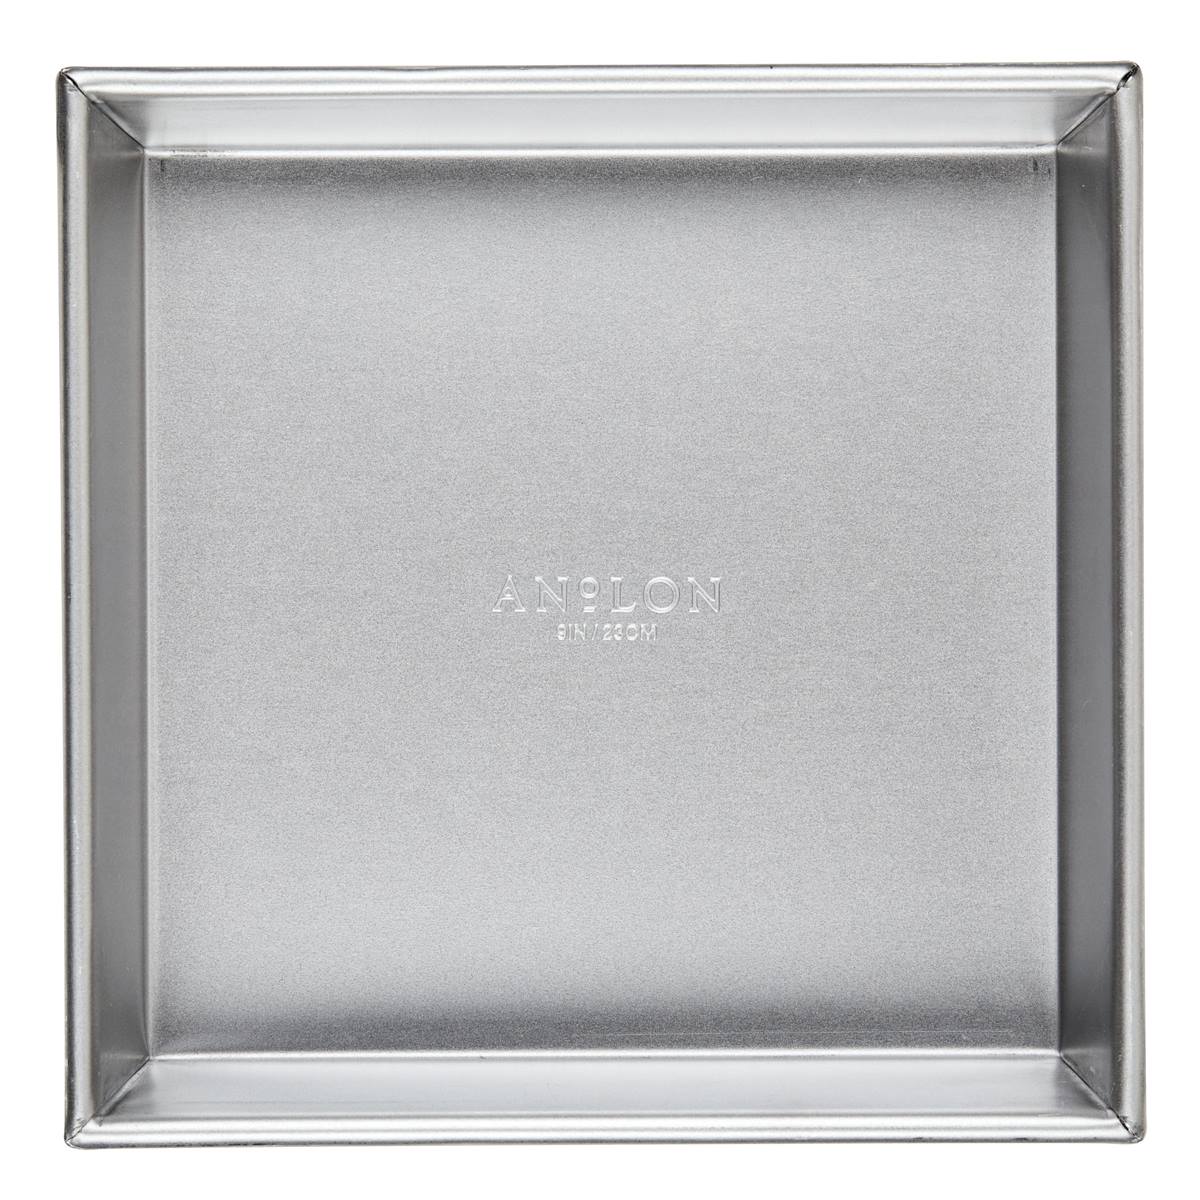 Anolon(R) Professional Bakeware 9in. Square Cake Pan